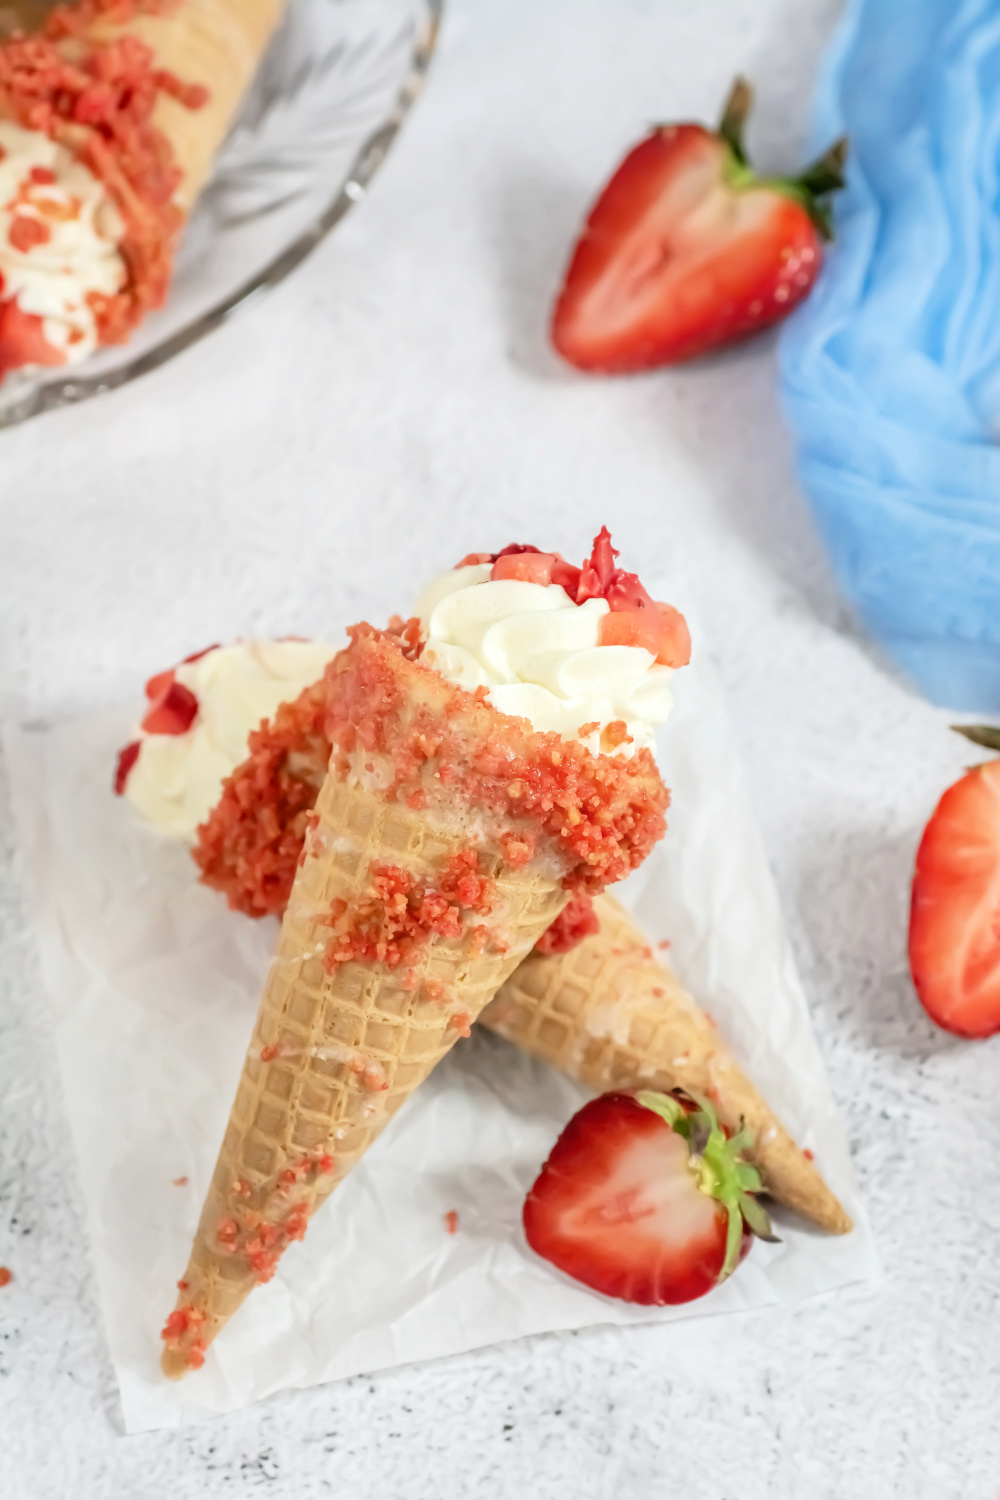 Two strawberry crunch cheesecake cones criss crossed on piece of parchment paper with cut strawberries to the side